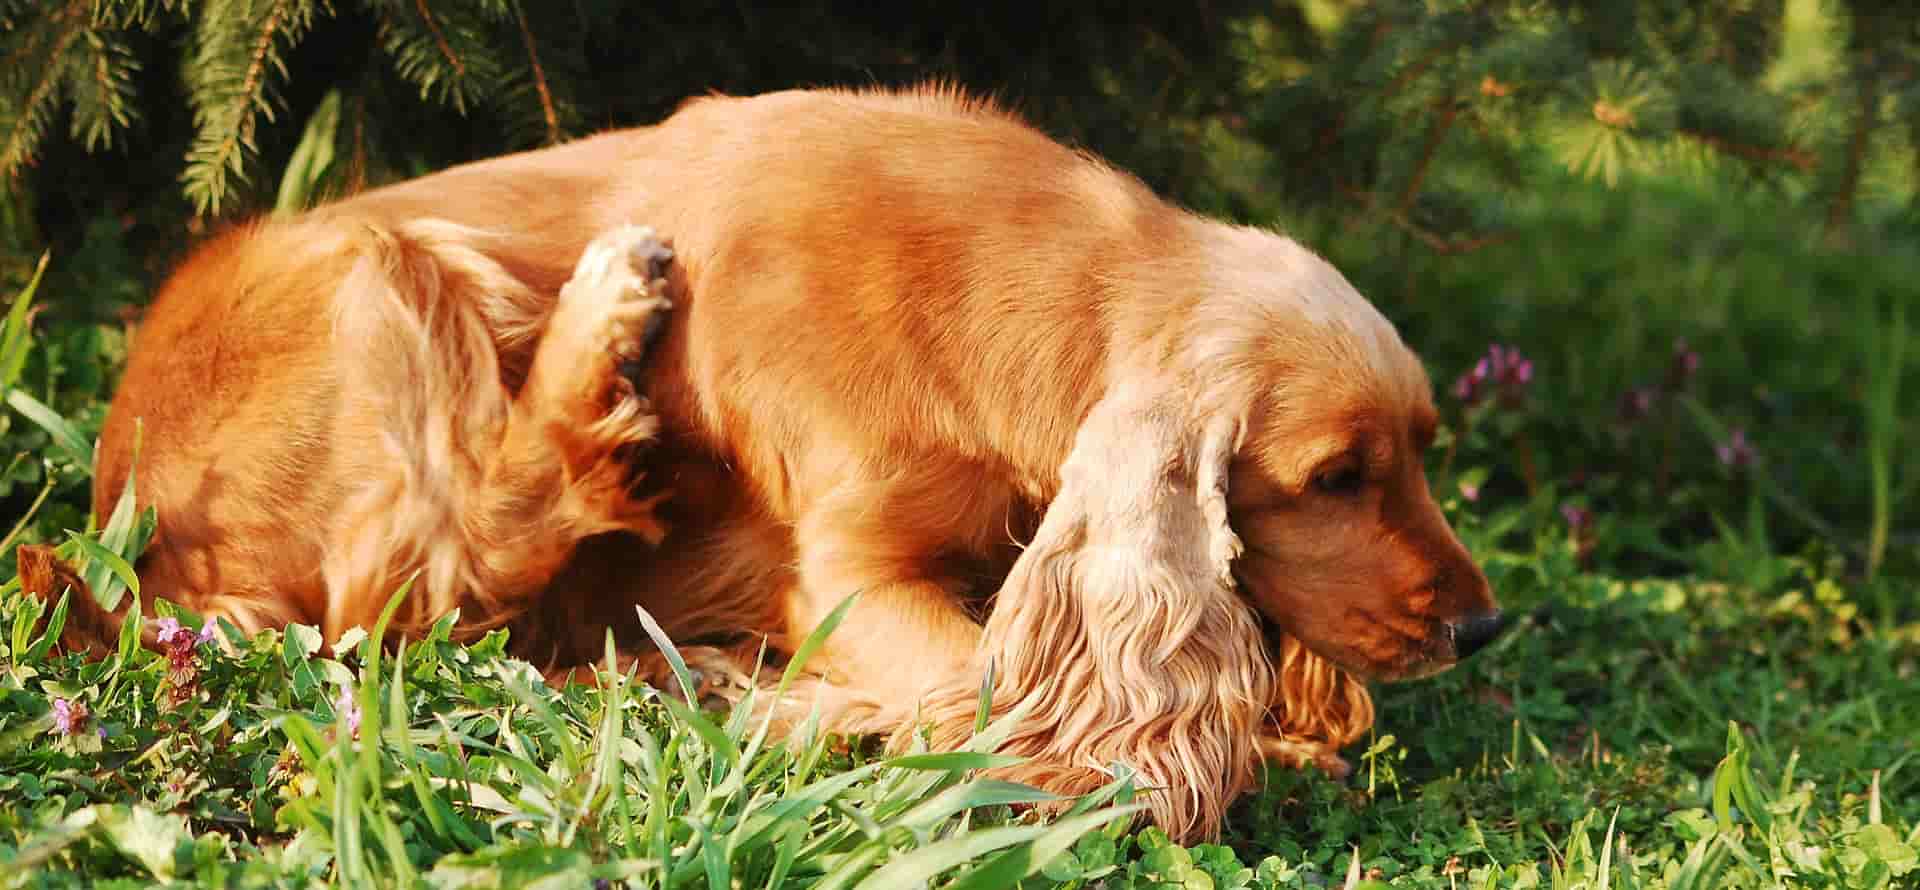 What can I do for my itchy dog?